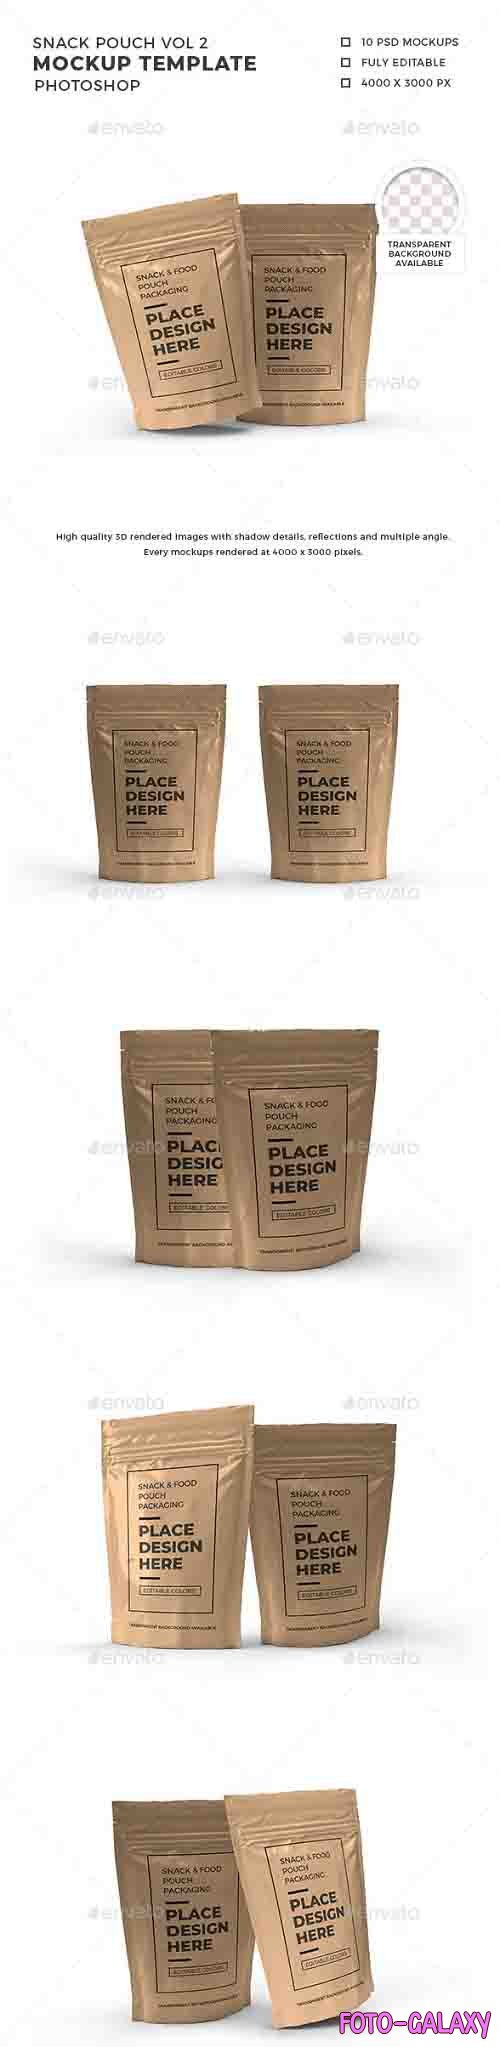 Snack Pouch Packaging Mockup Template Vol 2 - 32588901